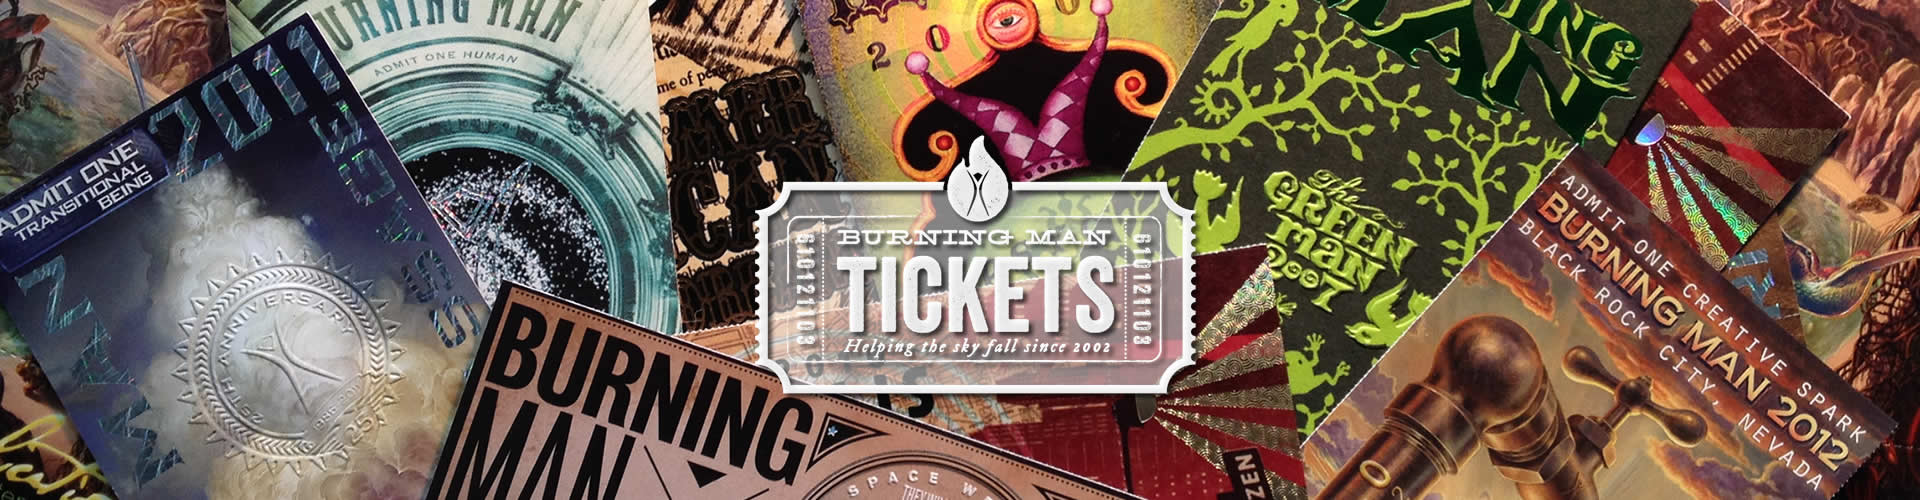 Burning Man Tickets  Official source for information about Black